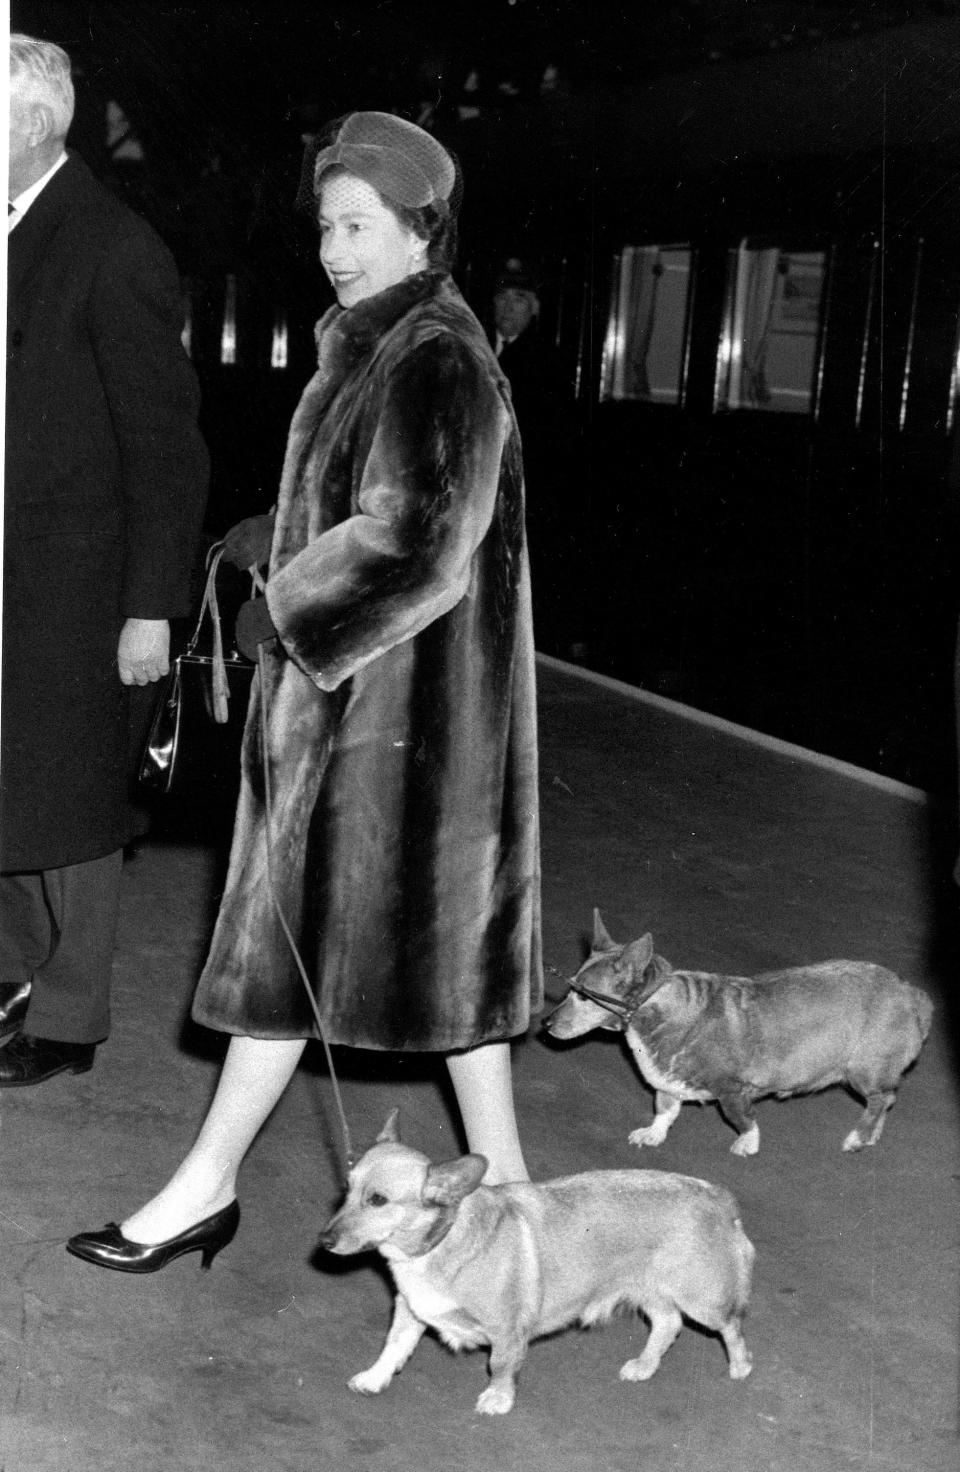 FILE - Britain's Queen Elizabeth II walks with one of her corgis in an undated file photo. Queen Elizabeth II's corgis were a key part of her public persona and her death has raised concern over who will care for her beloved dogs. The corgis were always by her side and lived a life of privilege fit for a royal. She owned nearly 30 throughout her life. She is reportedly survived by four dogs. (AP Photo)